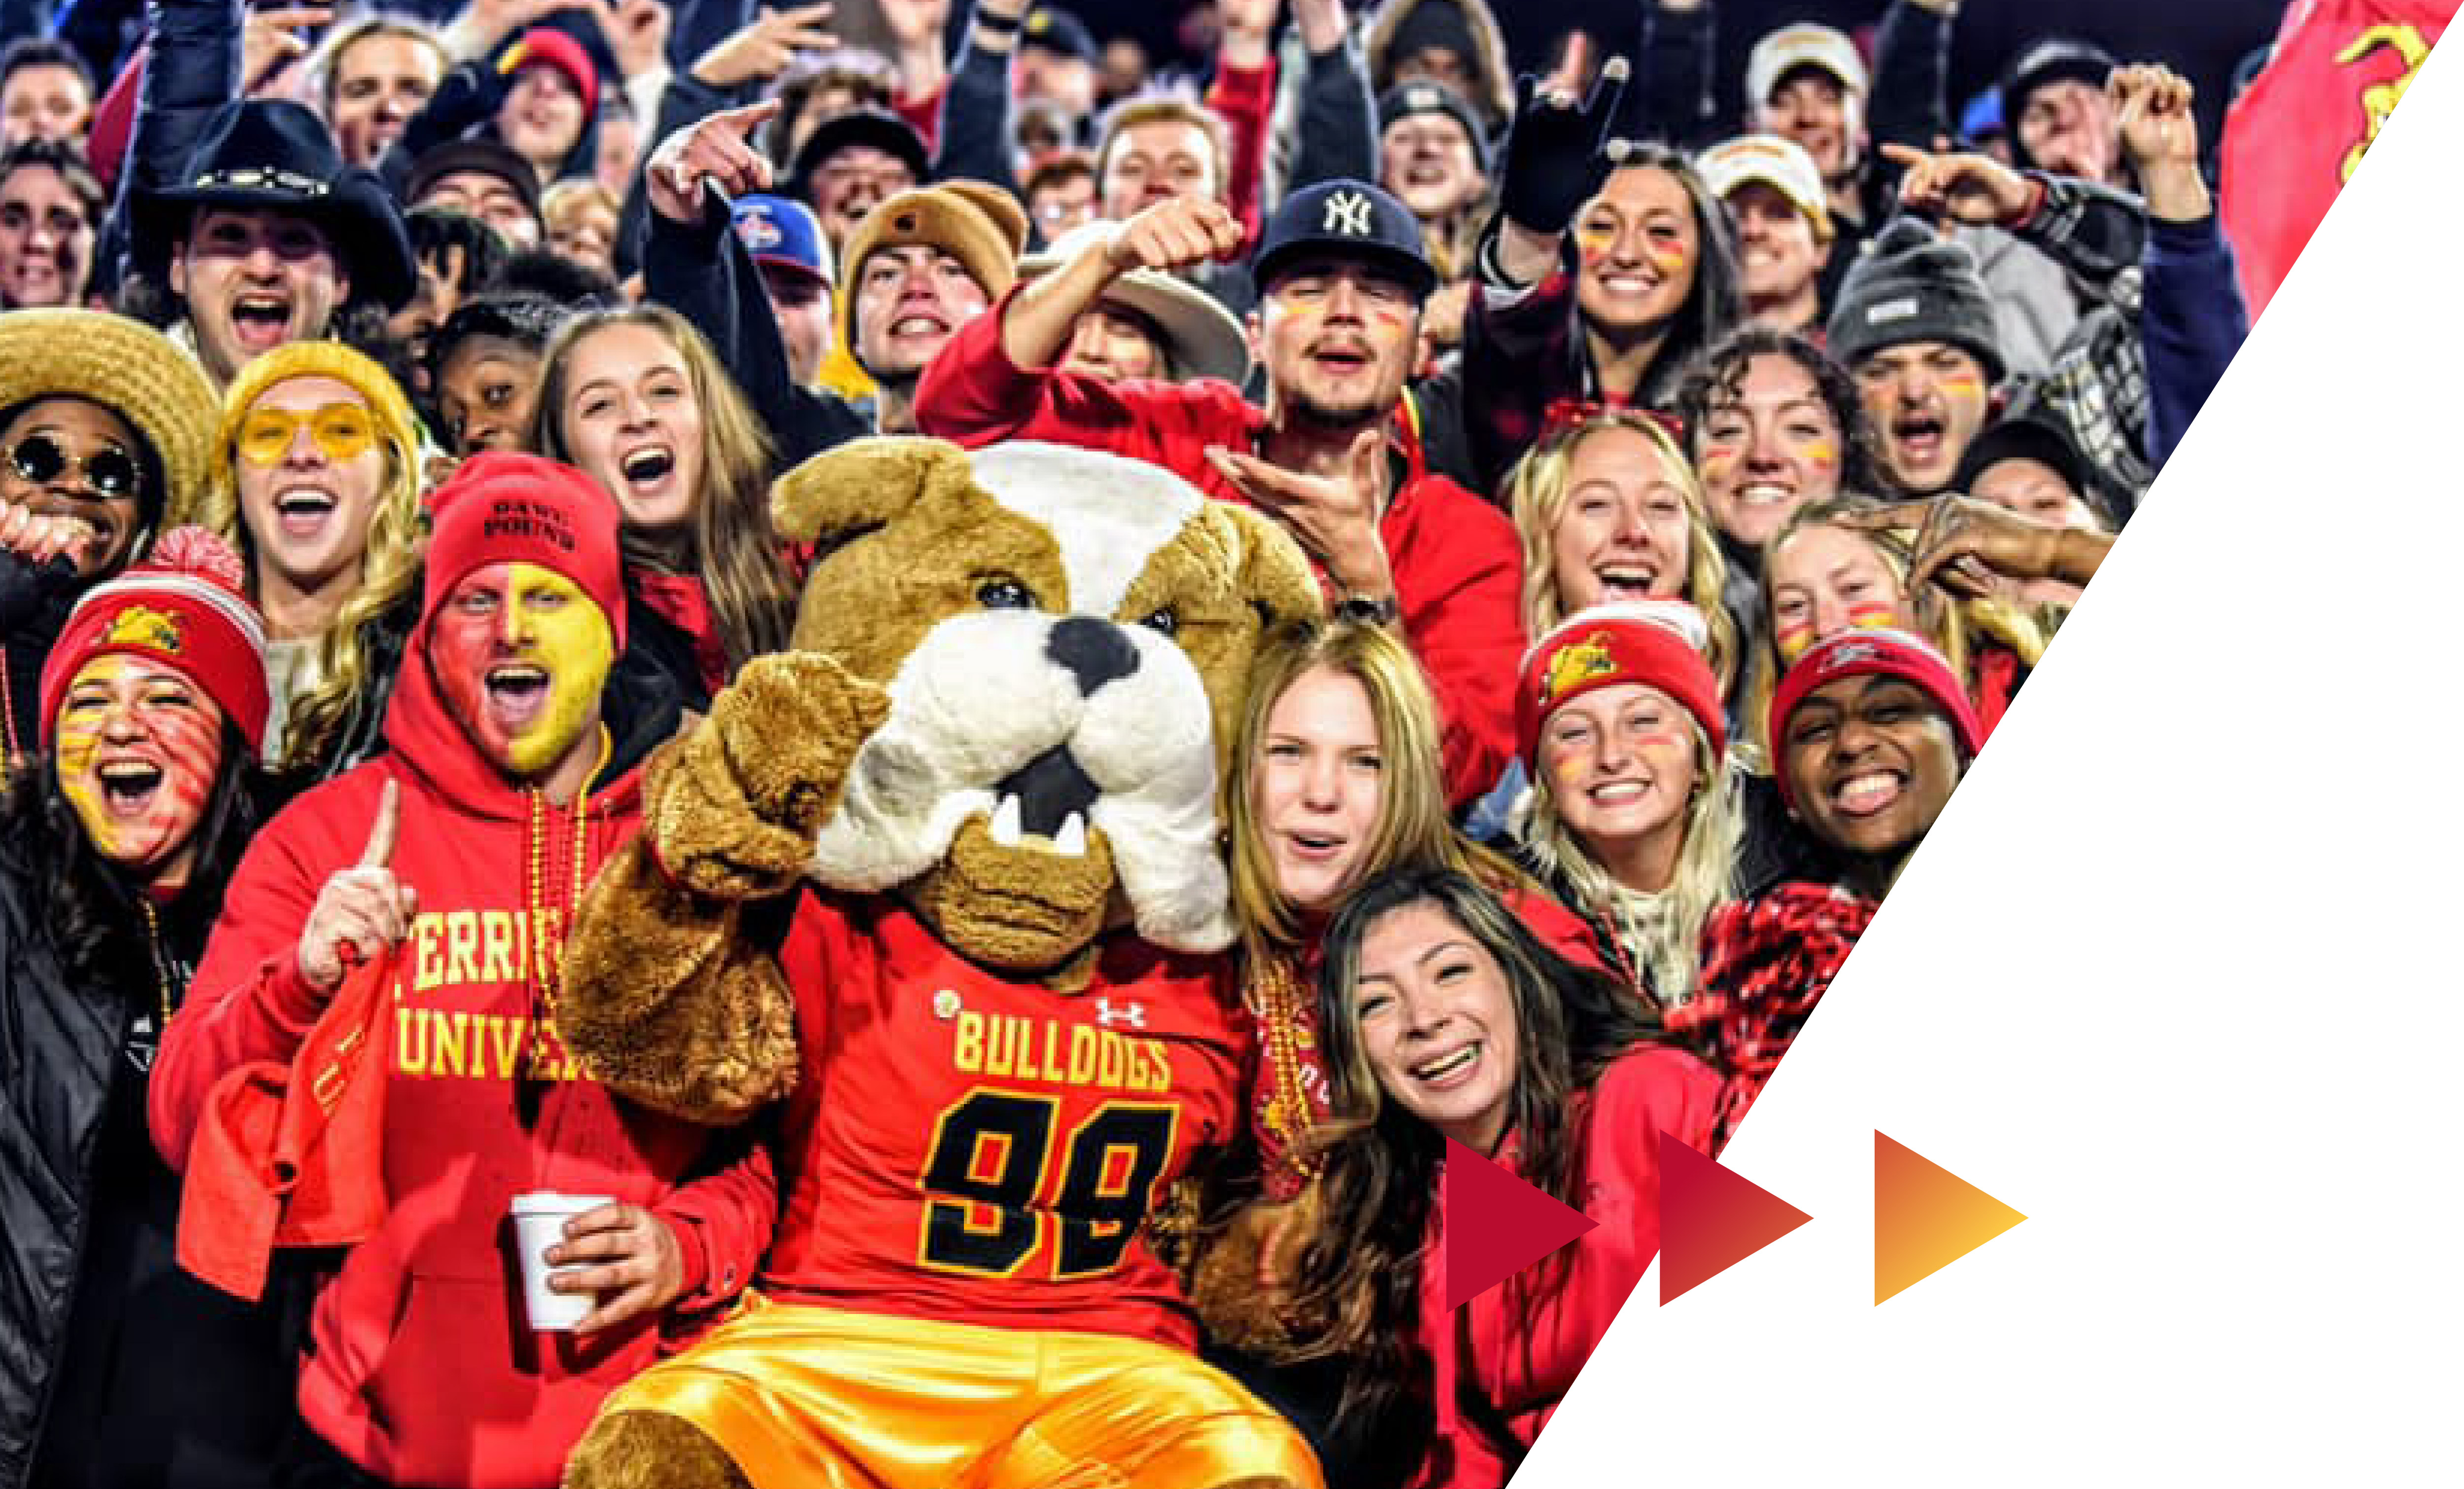 Students at Ferris State Football game